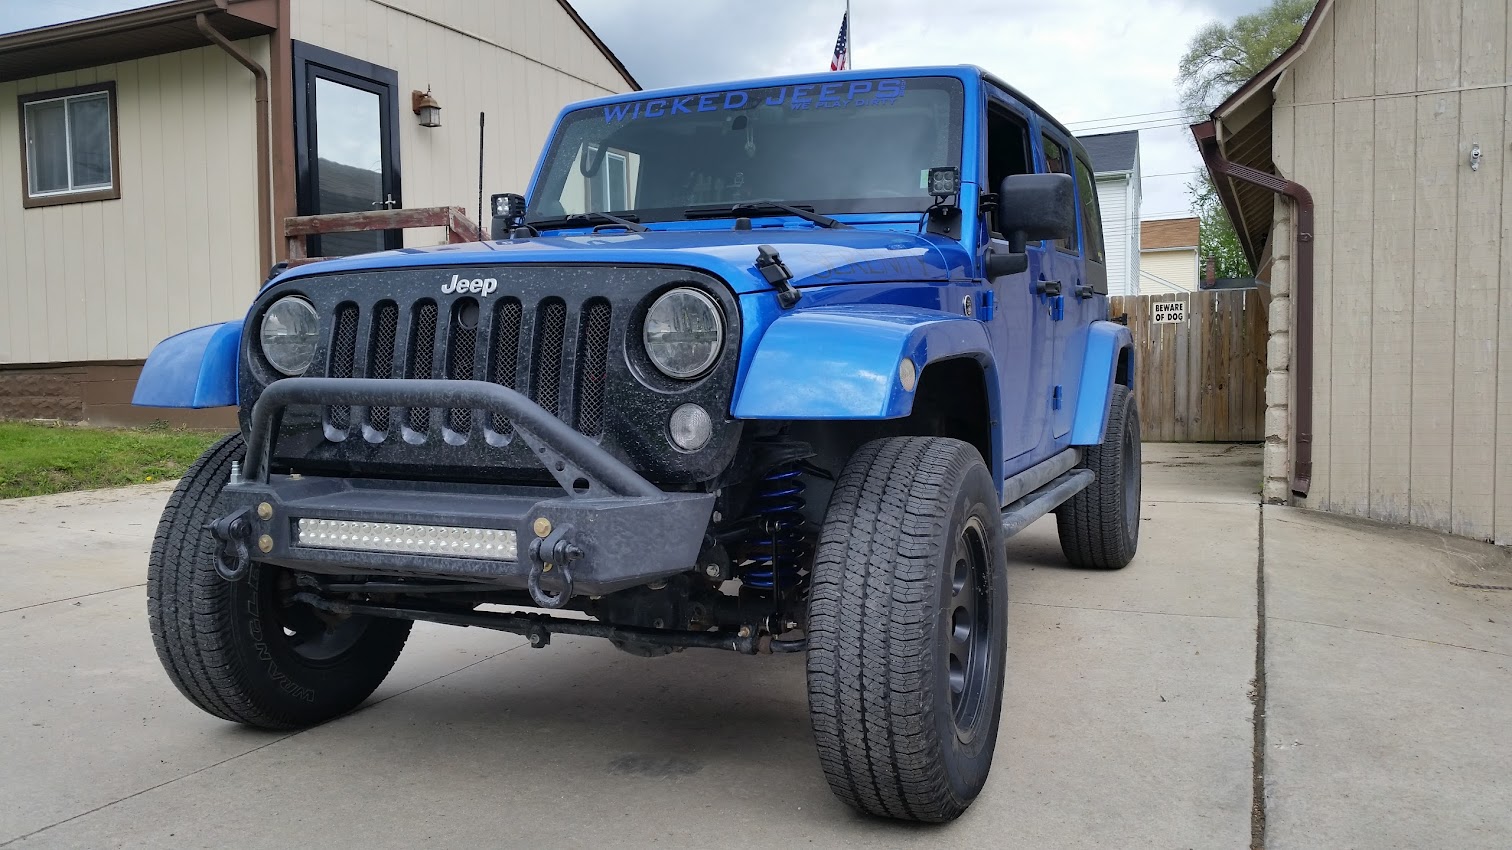 Hydro Blue Pearl Thread - Page 42 - Jeep Wrangler Forum